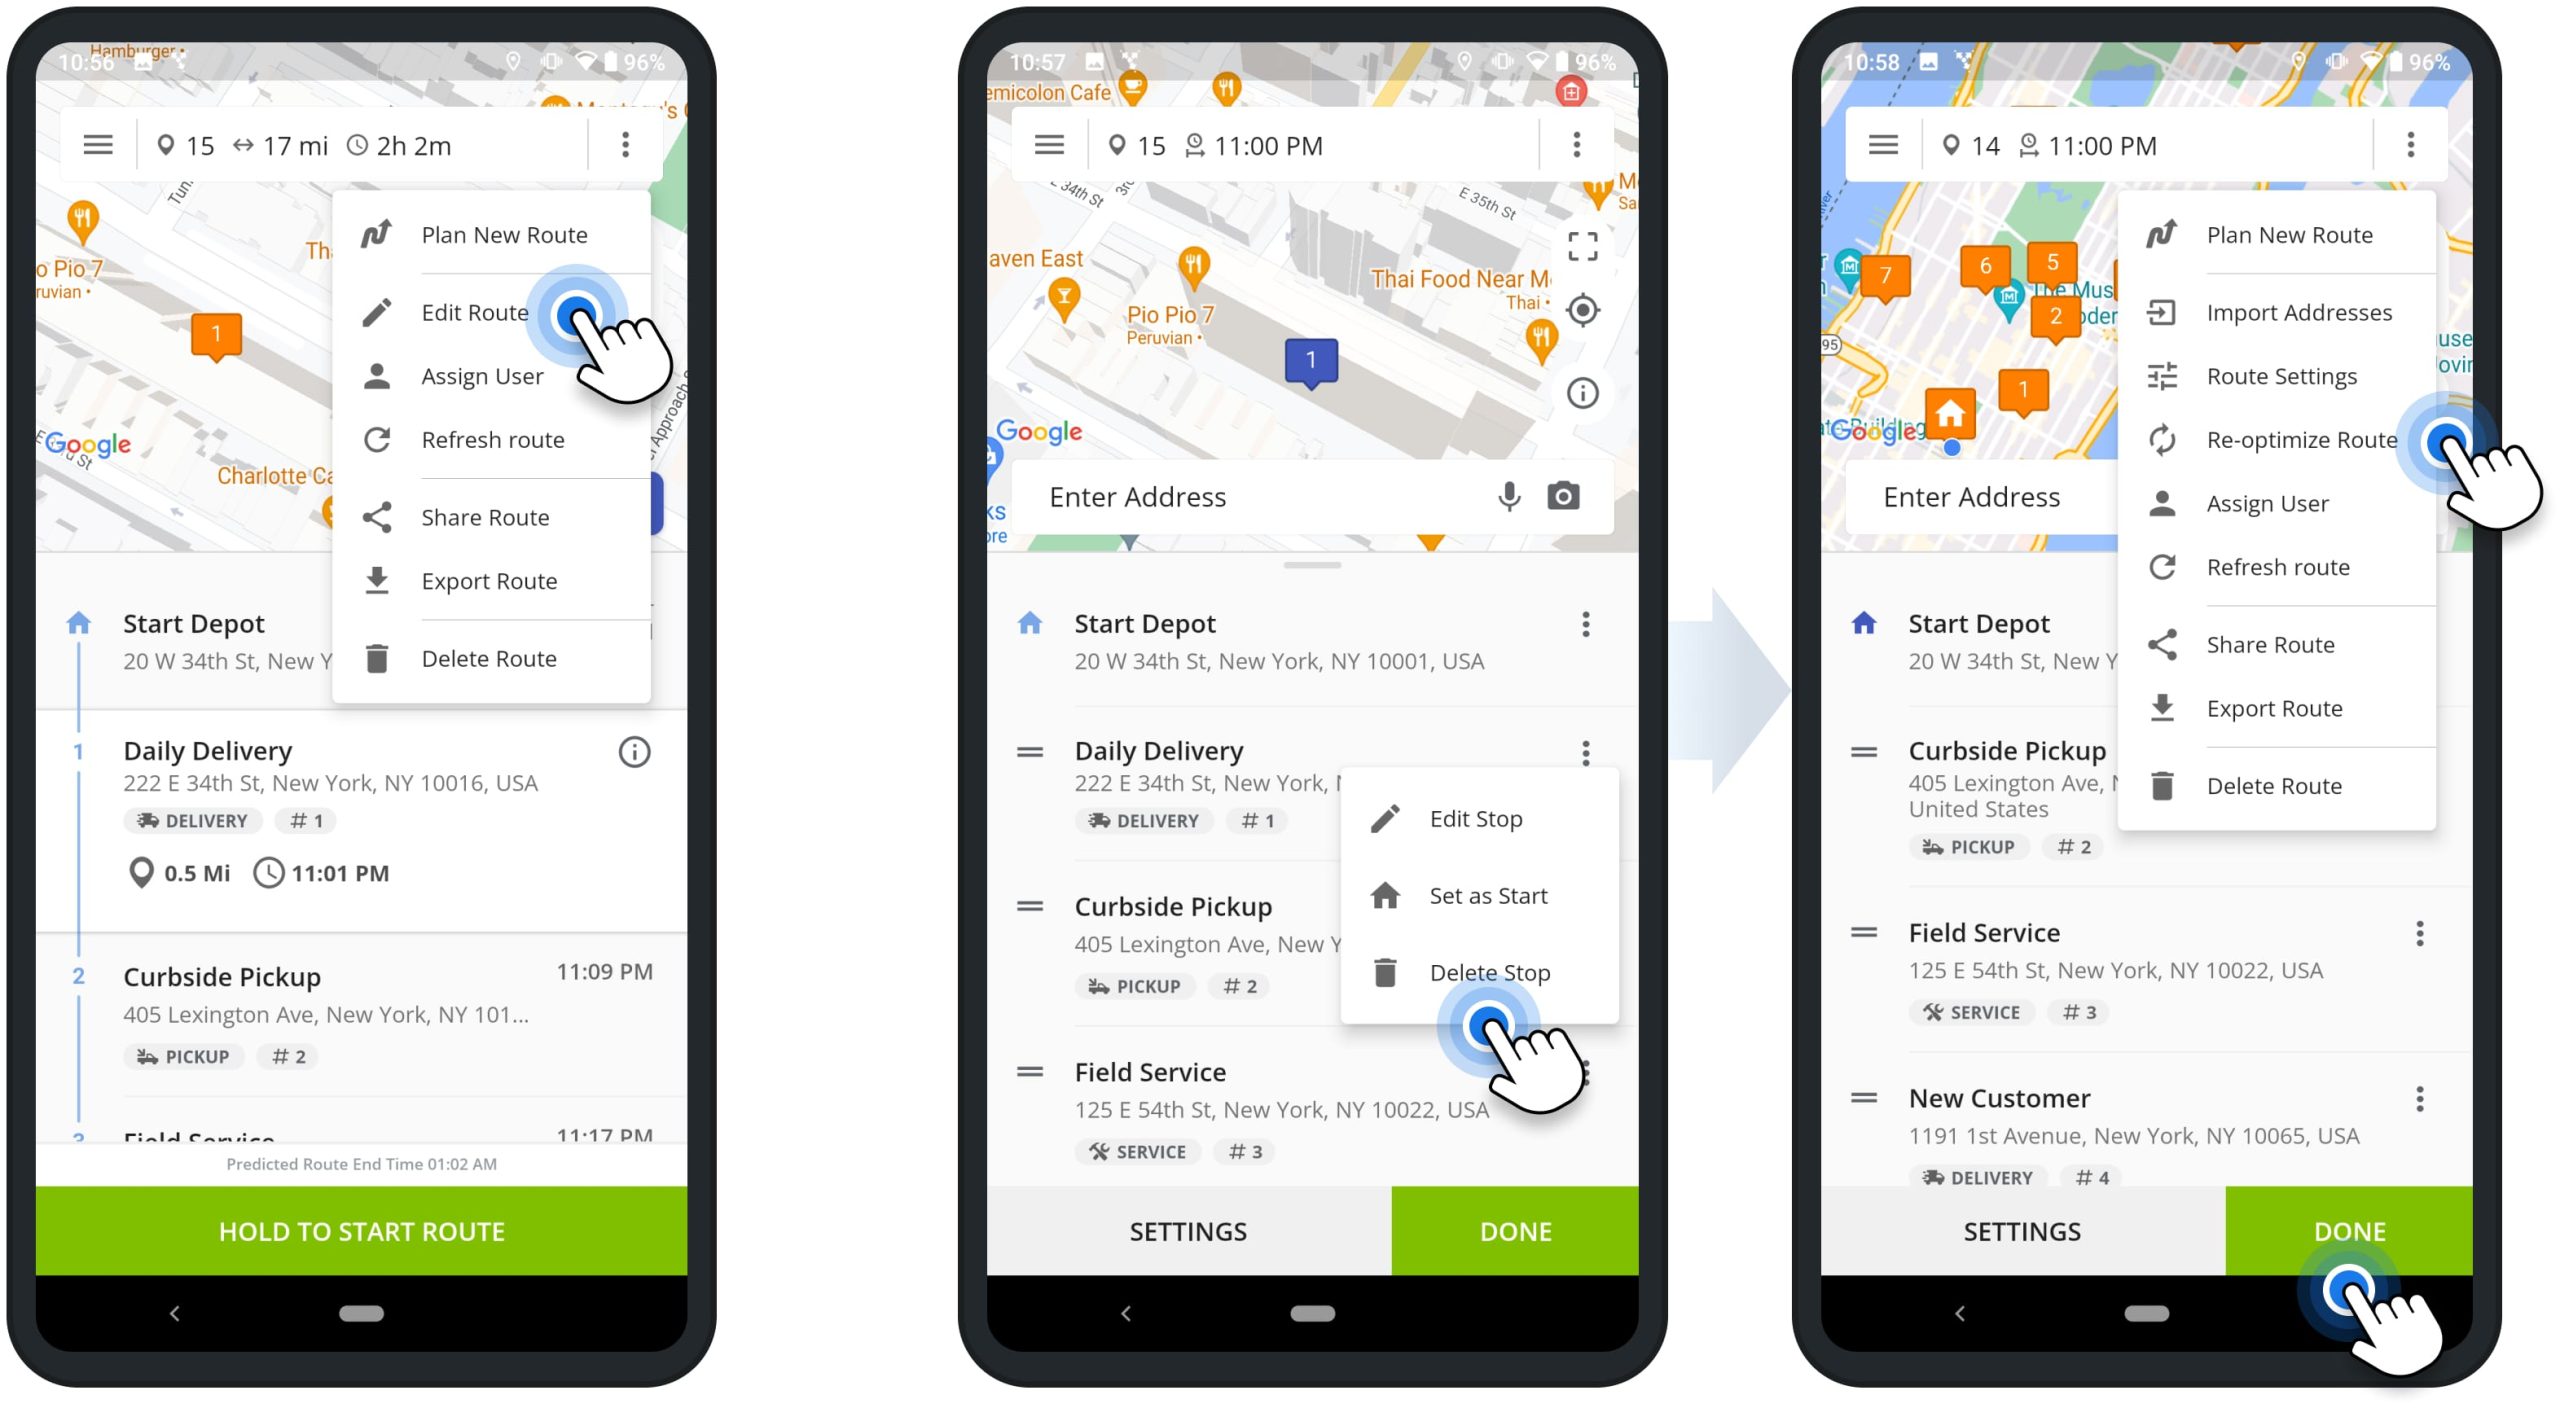 Delete stops and remove addresses from optimized routes on Route4Me's Android Route Planner app for last-mile drivers.